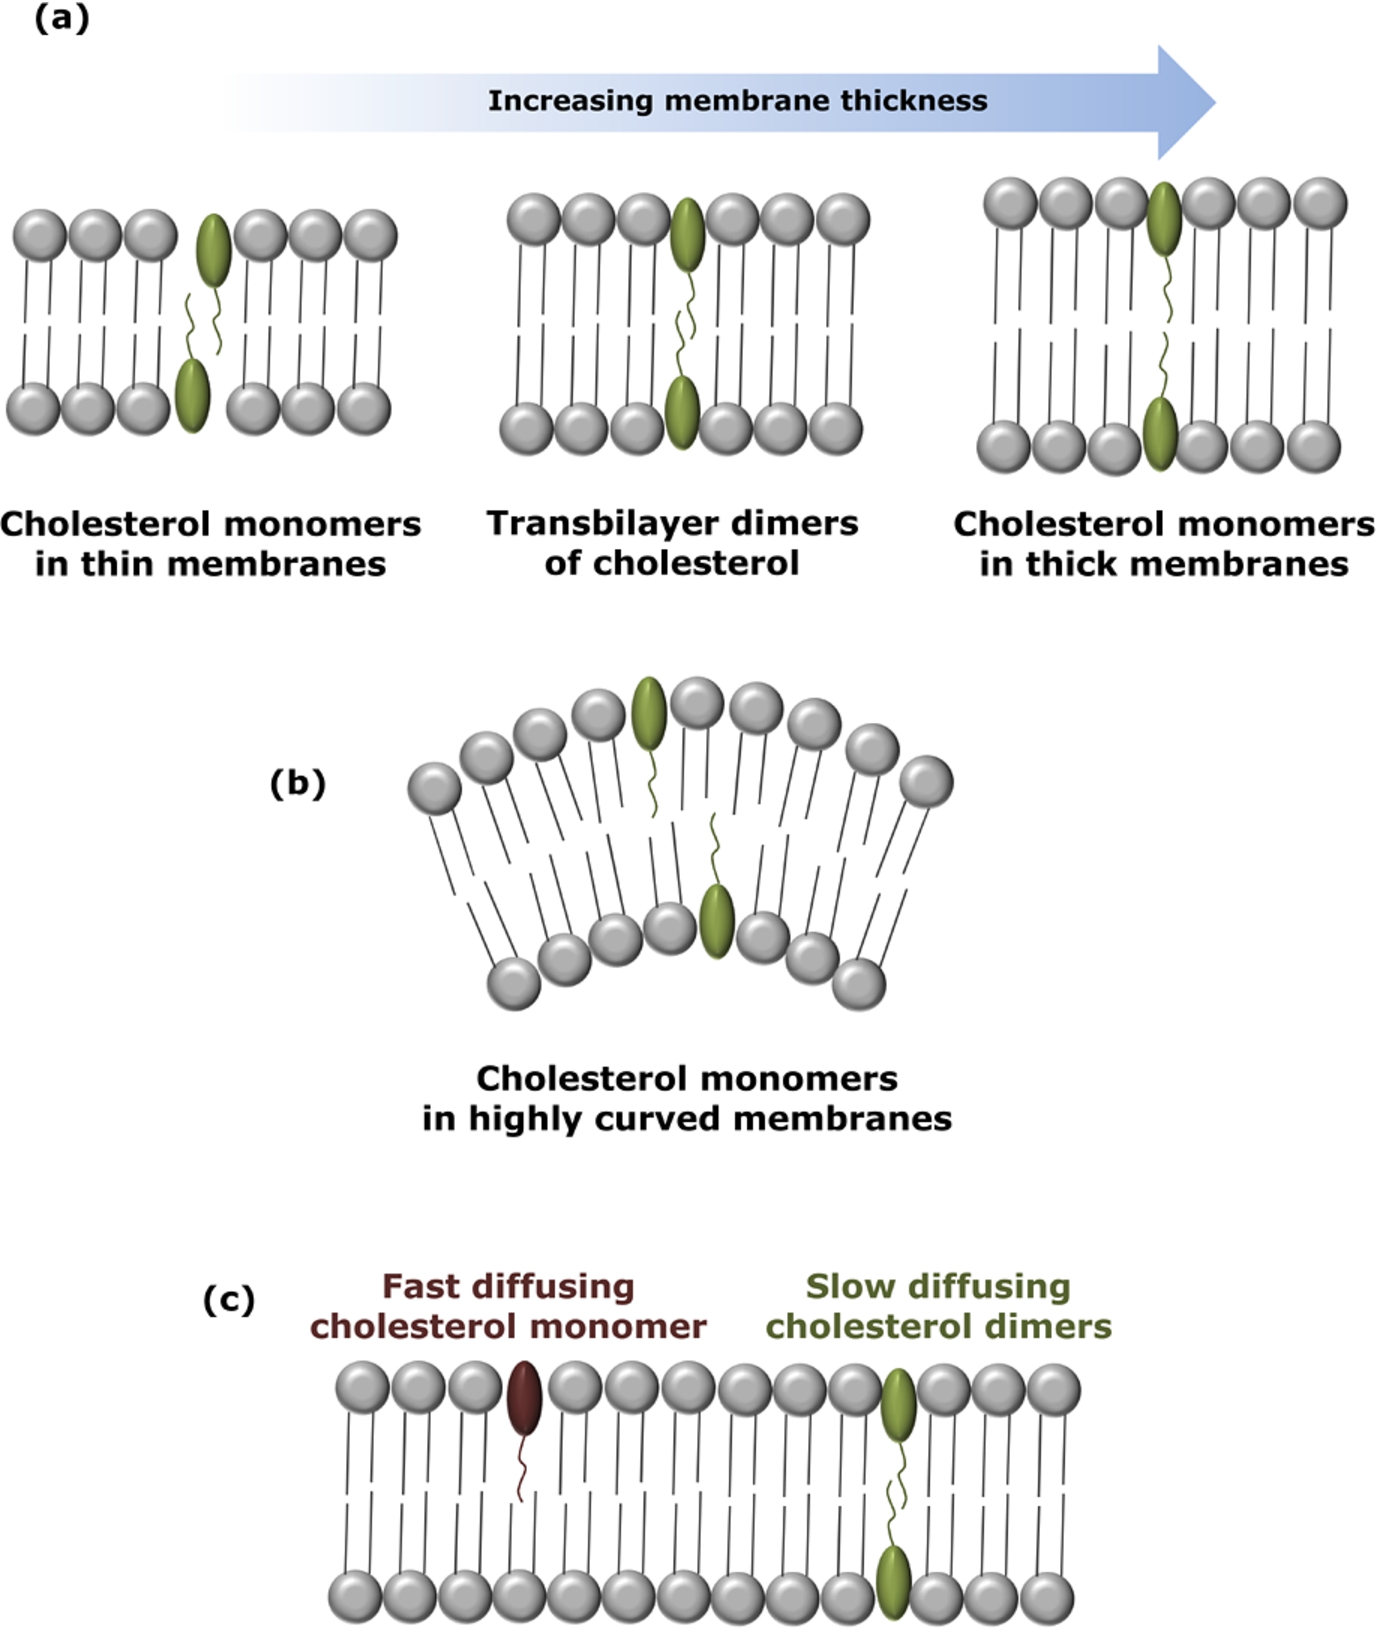 Organization and dynamics of transbilayer dimers of cholesterol at low concentrations. The schematic diagram shows the organization of cholesterol dimers in (a) membranes of varying thickness. The existence of cholesterol as transmembrane tail-to-tail dimers is stringently controlled within a narrow window of membrane thickness. Insights from our previous work suggest that cholesterol exists as monomers in relatively thin and thick membranes, while it forms transmembrane tail-to-tail dimers in membranes of intermediate (optimum) thickness. (b) Cholesterol dimers are unstable at high surface curvature. (c) Monomers of cholesterol show faster lateral dynamics in membranes relative to transbilayer tail-to-tail dimers of cholesterol (see [46] for details).